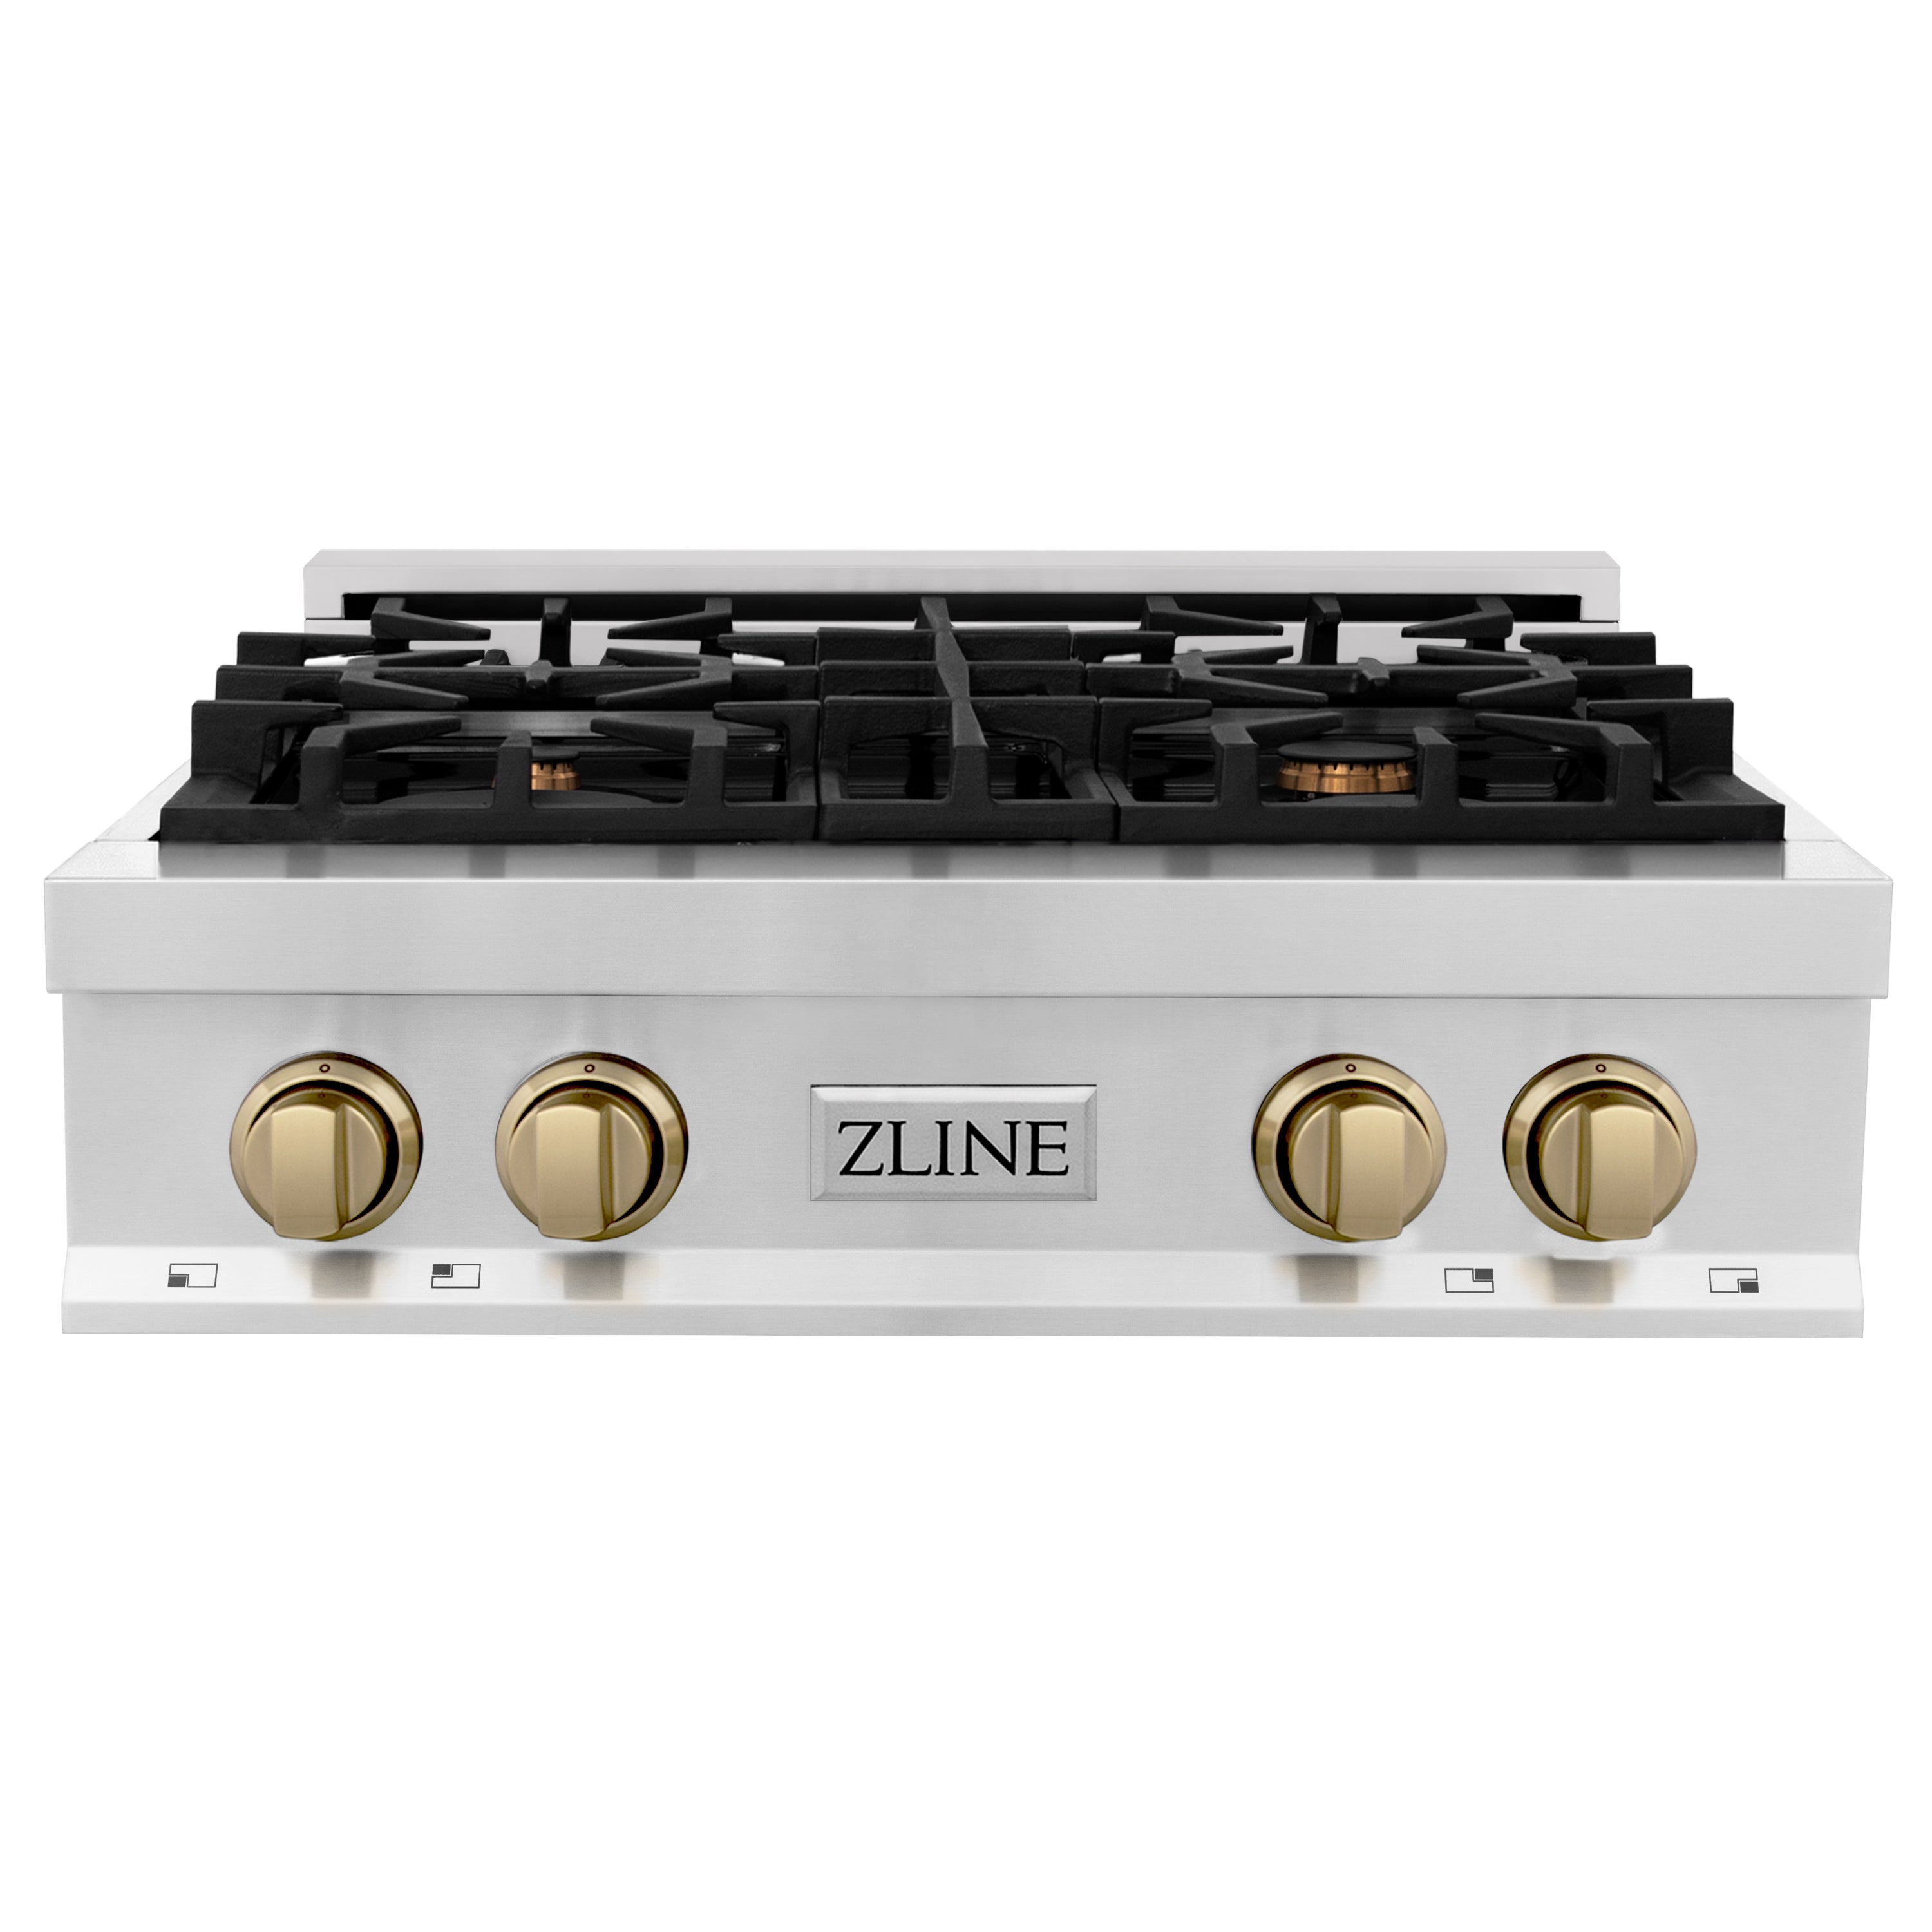 ZLINE Autograph Edition 30" Porcelain Rangetop with 4 Gas Burners in Stainless Steel and Champagne Bronze Accents (RTZ-30-CB)